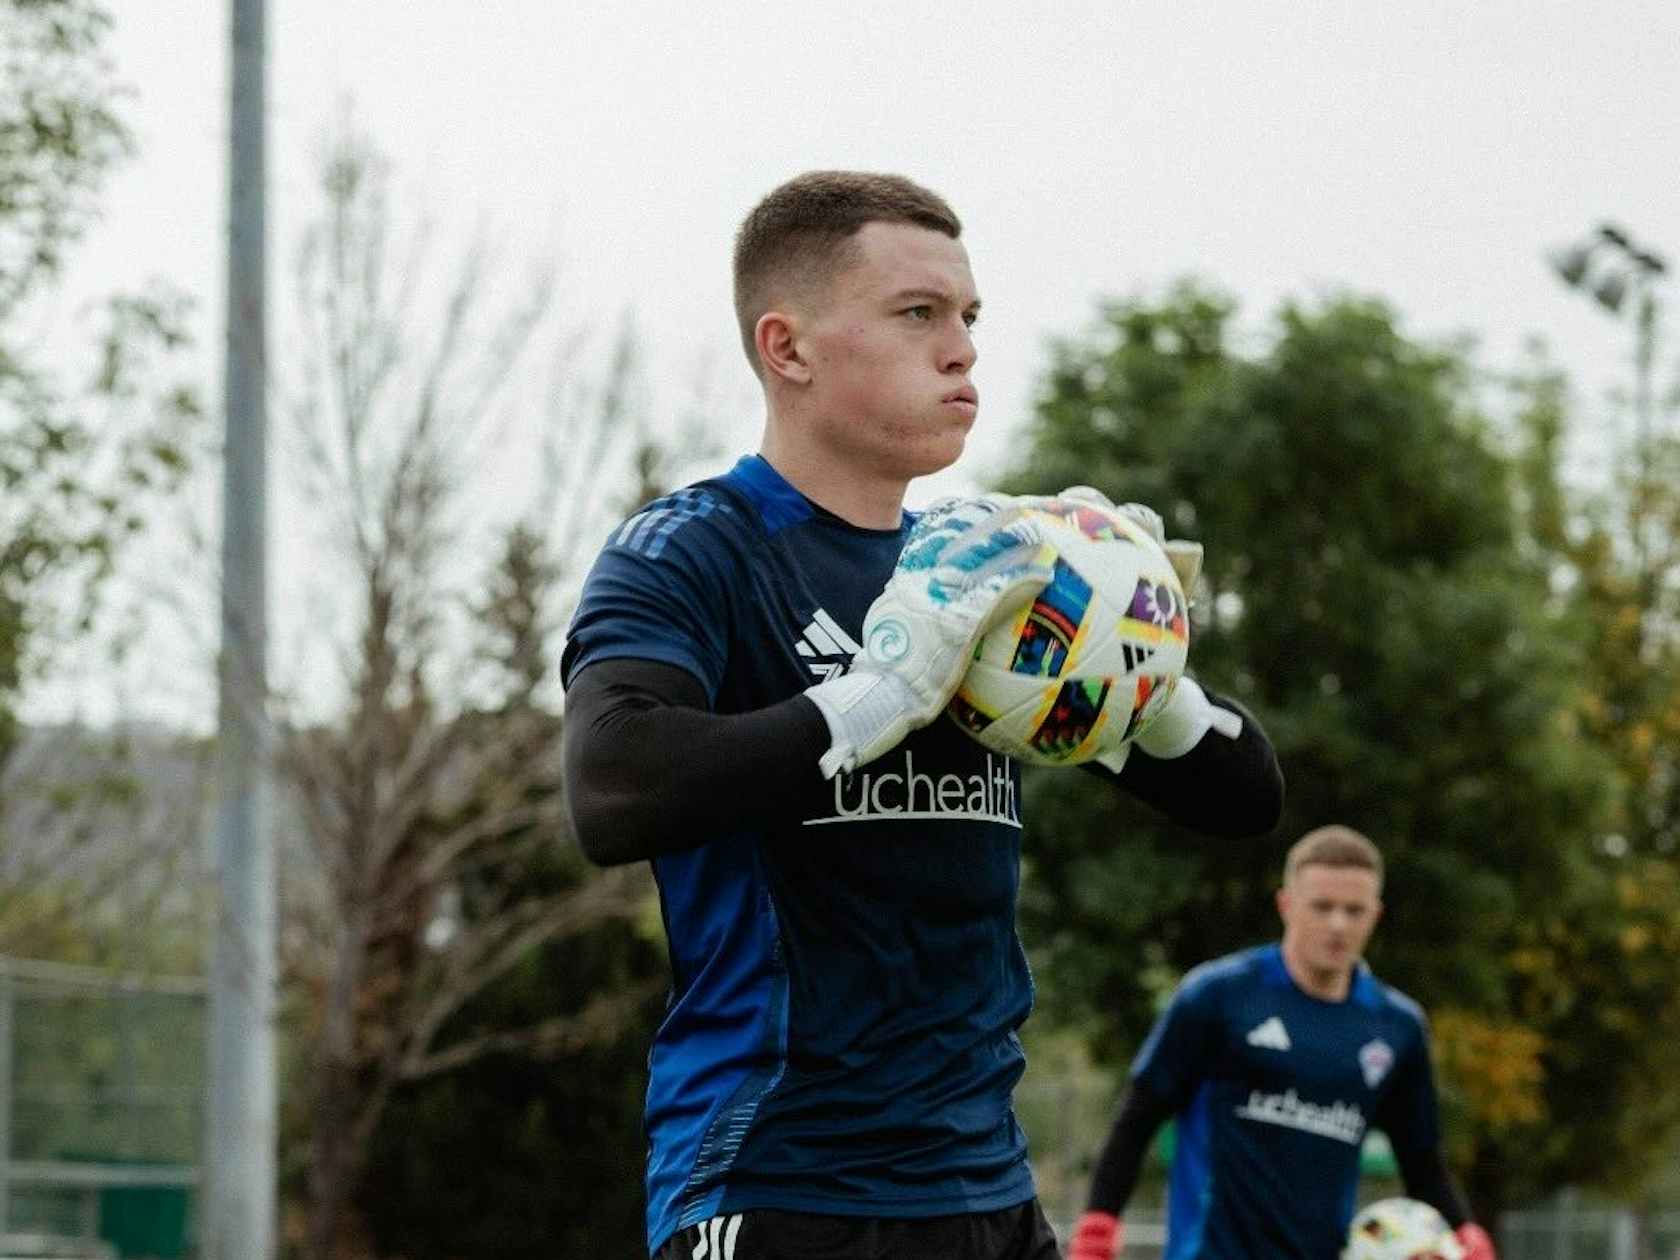 MLS goalkeeper links up with Arsenal for training this week 